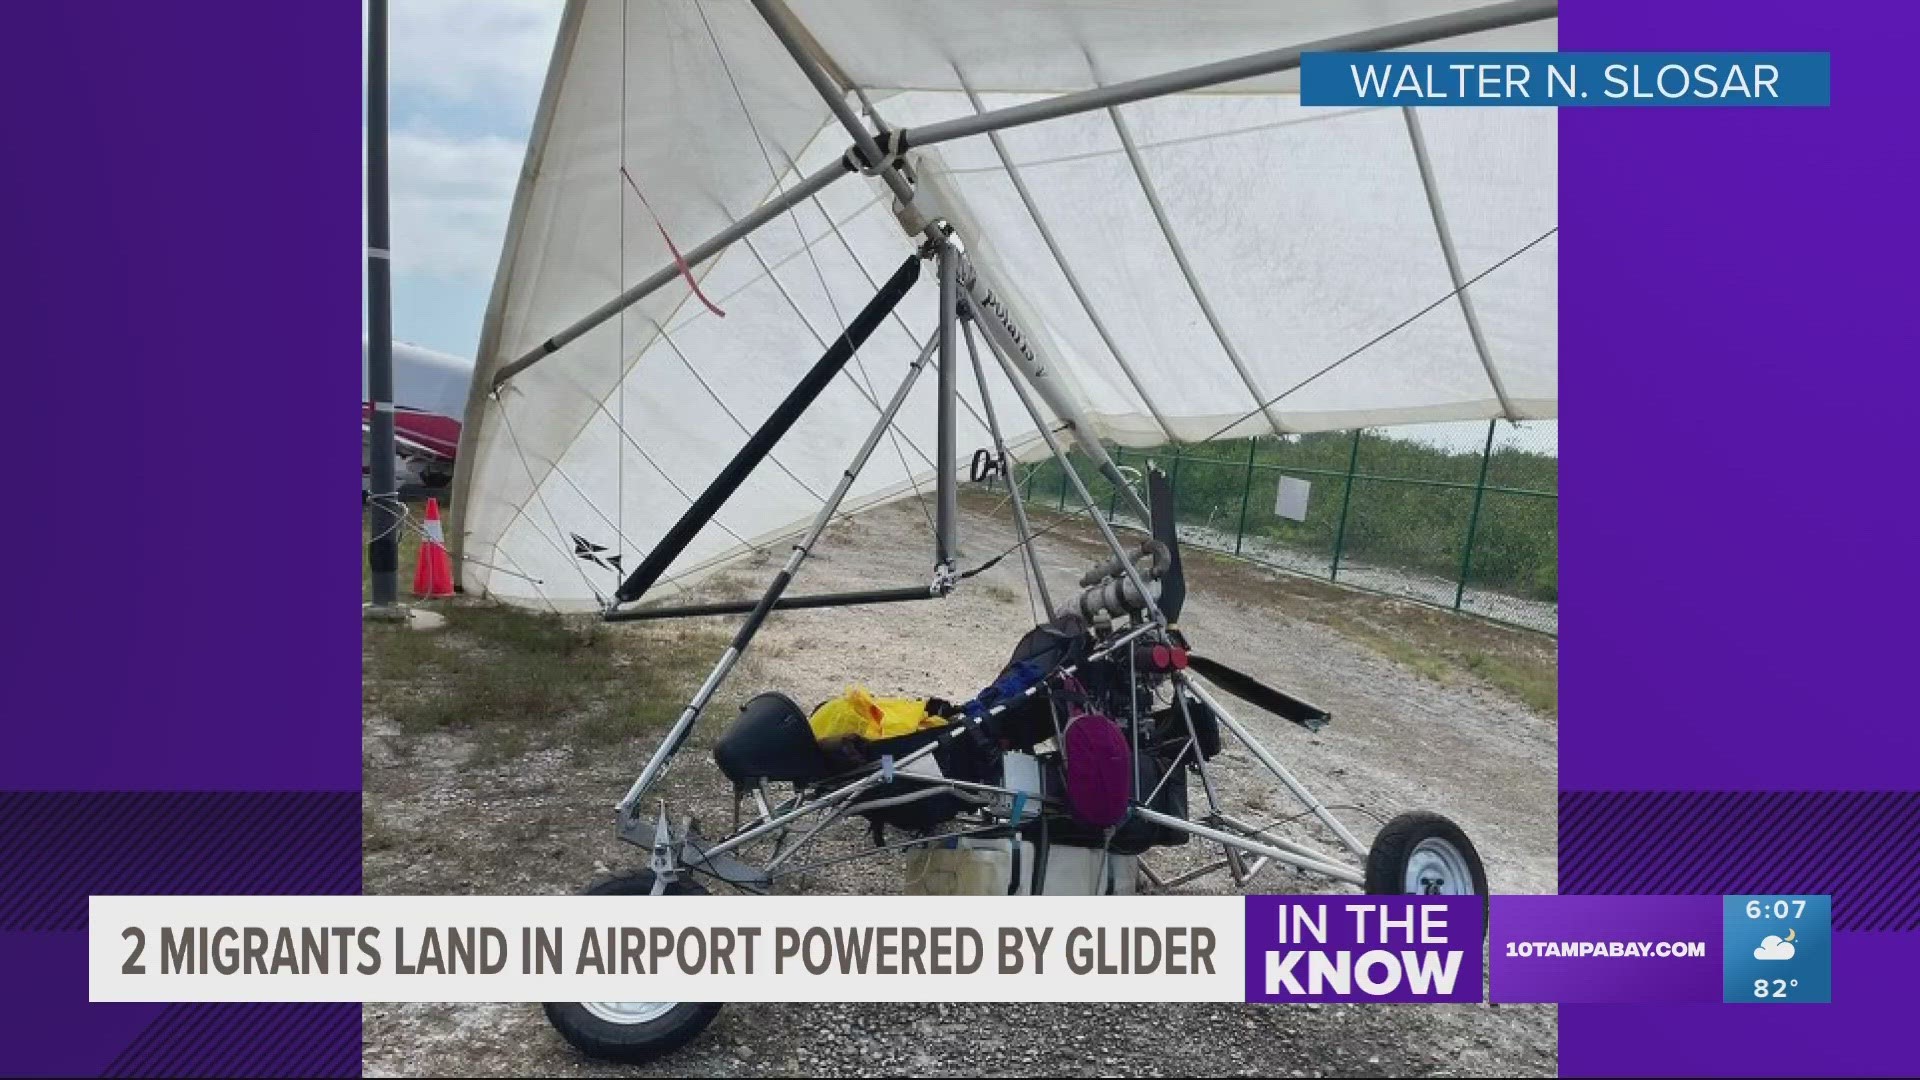 The Monroe County Sheriff's Office said the duo landed safely at Key West International Airport at about 10:30 a.m. Saturday.